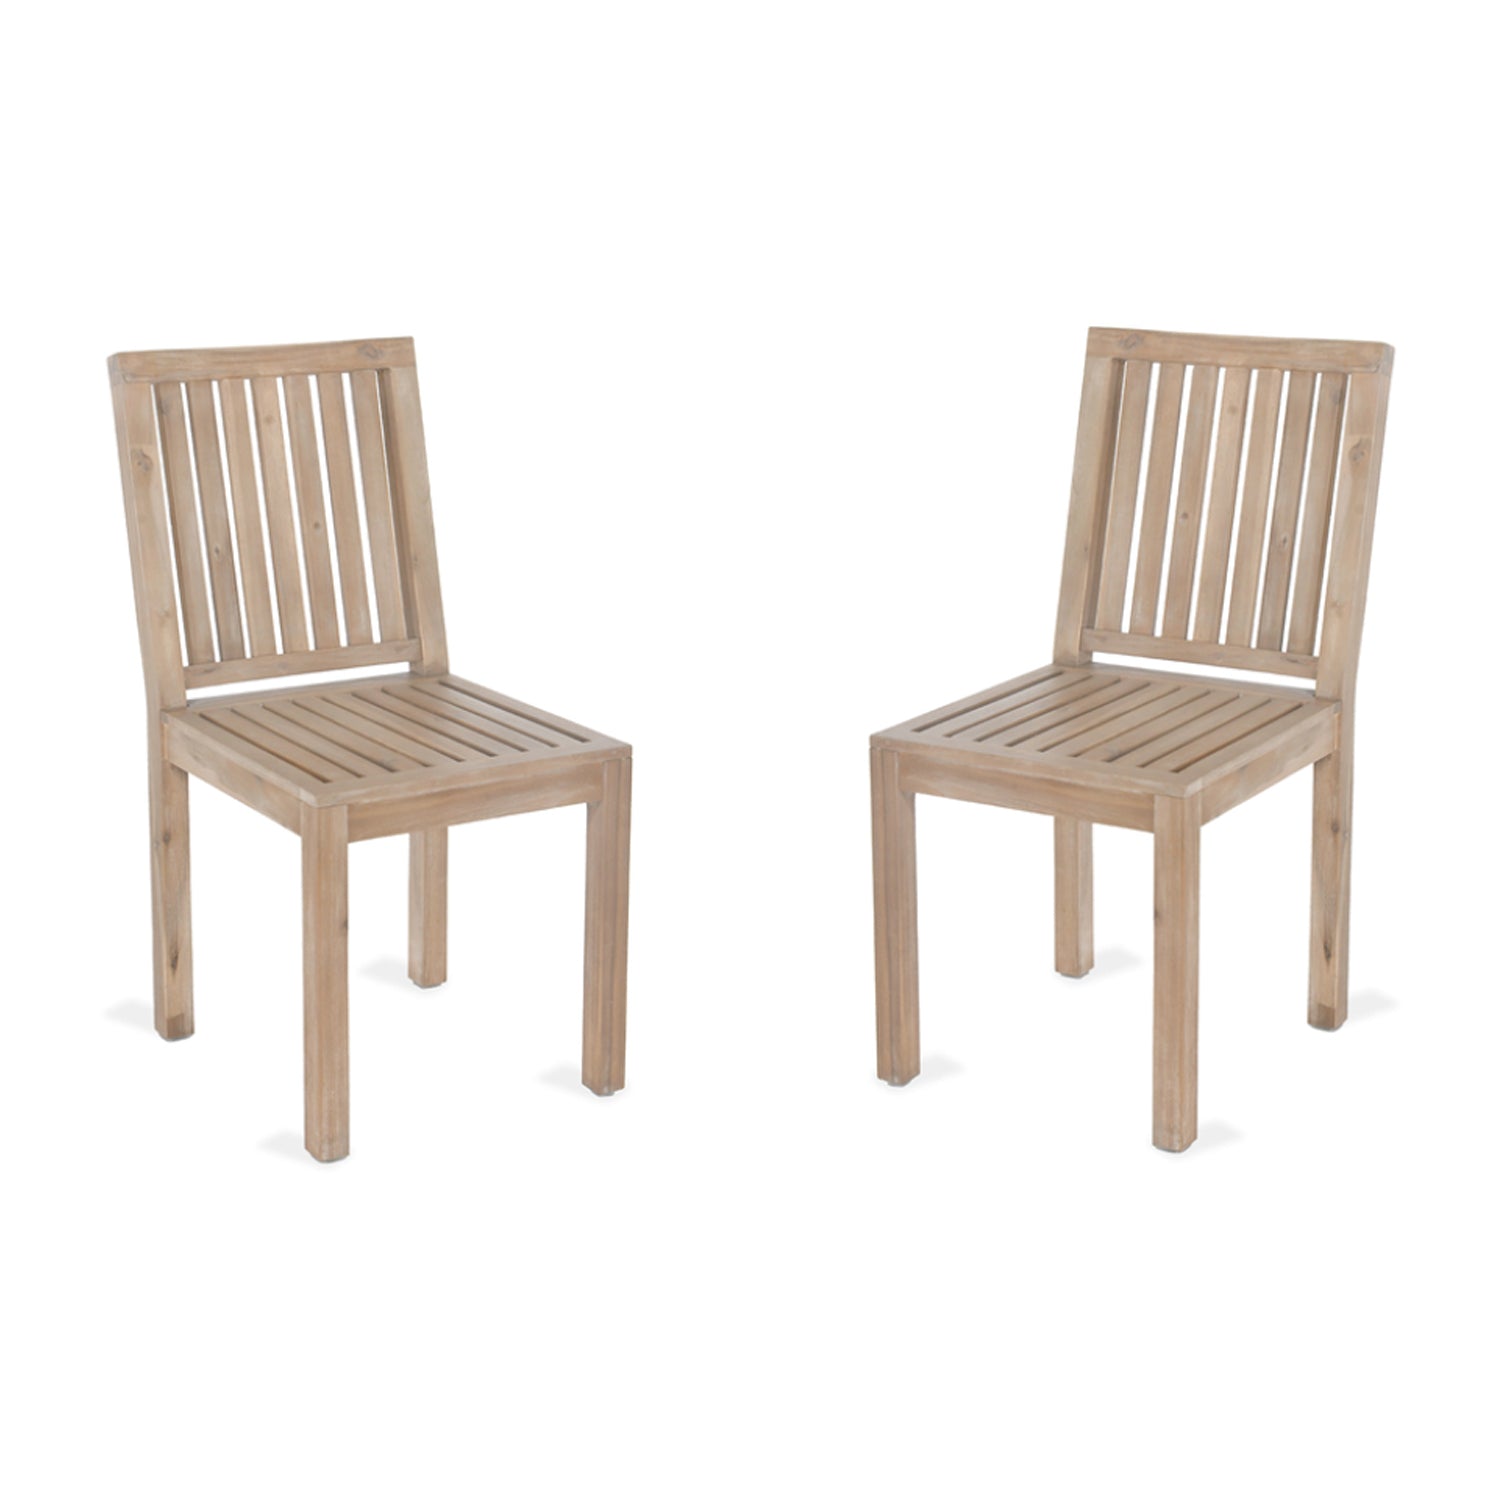 Pair of Porthallow Outdoor Dining Chairs Acacia by Garden Trading